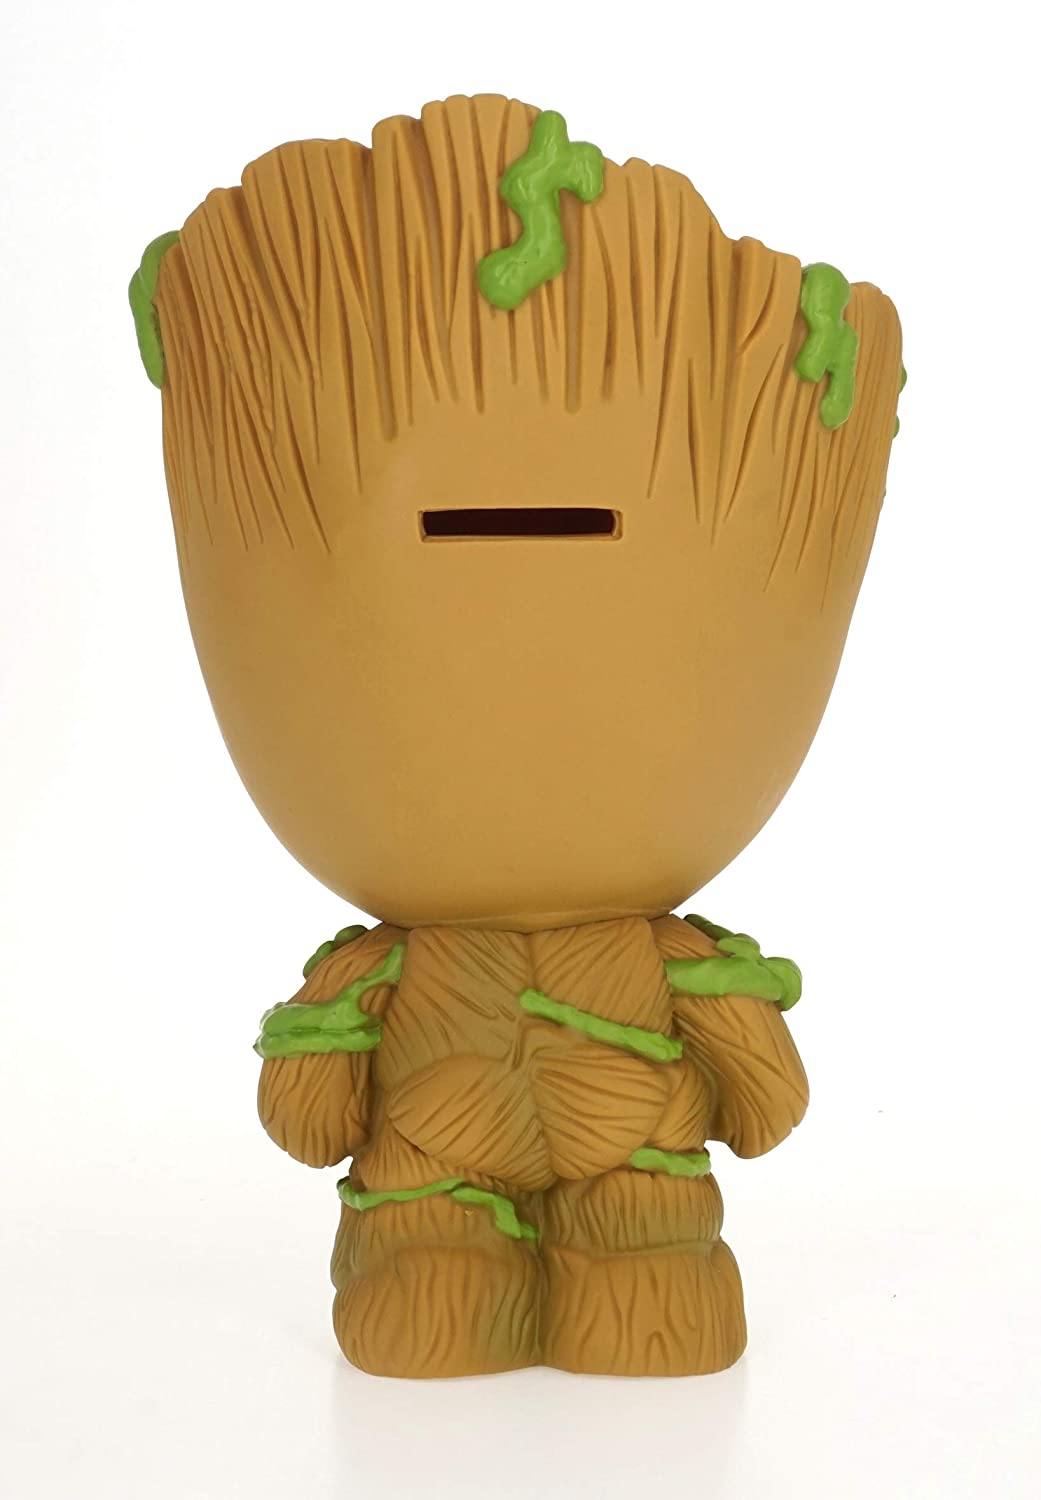 Guardians of the Galaxy Groot  Figural PVC Bank